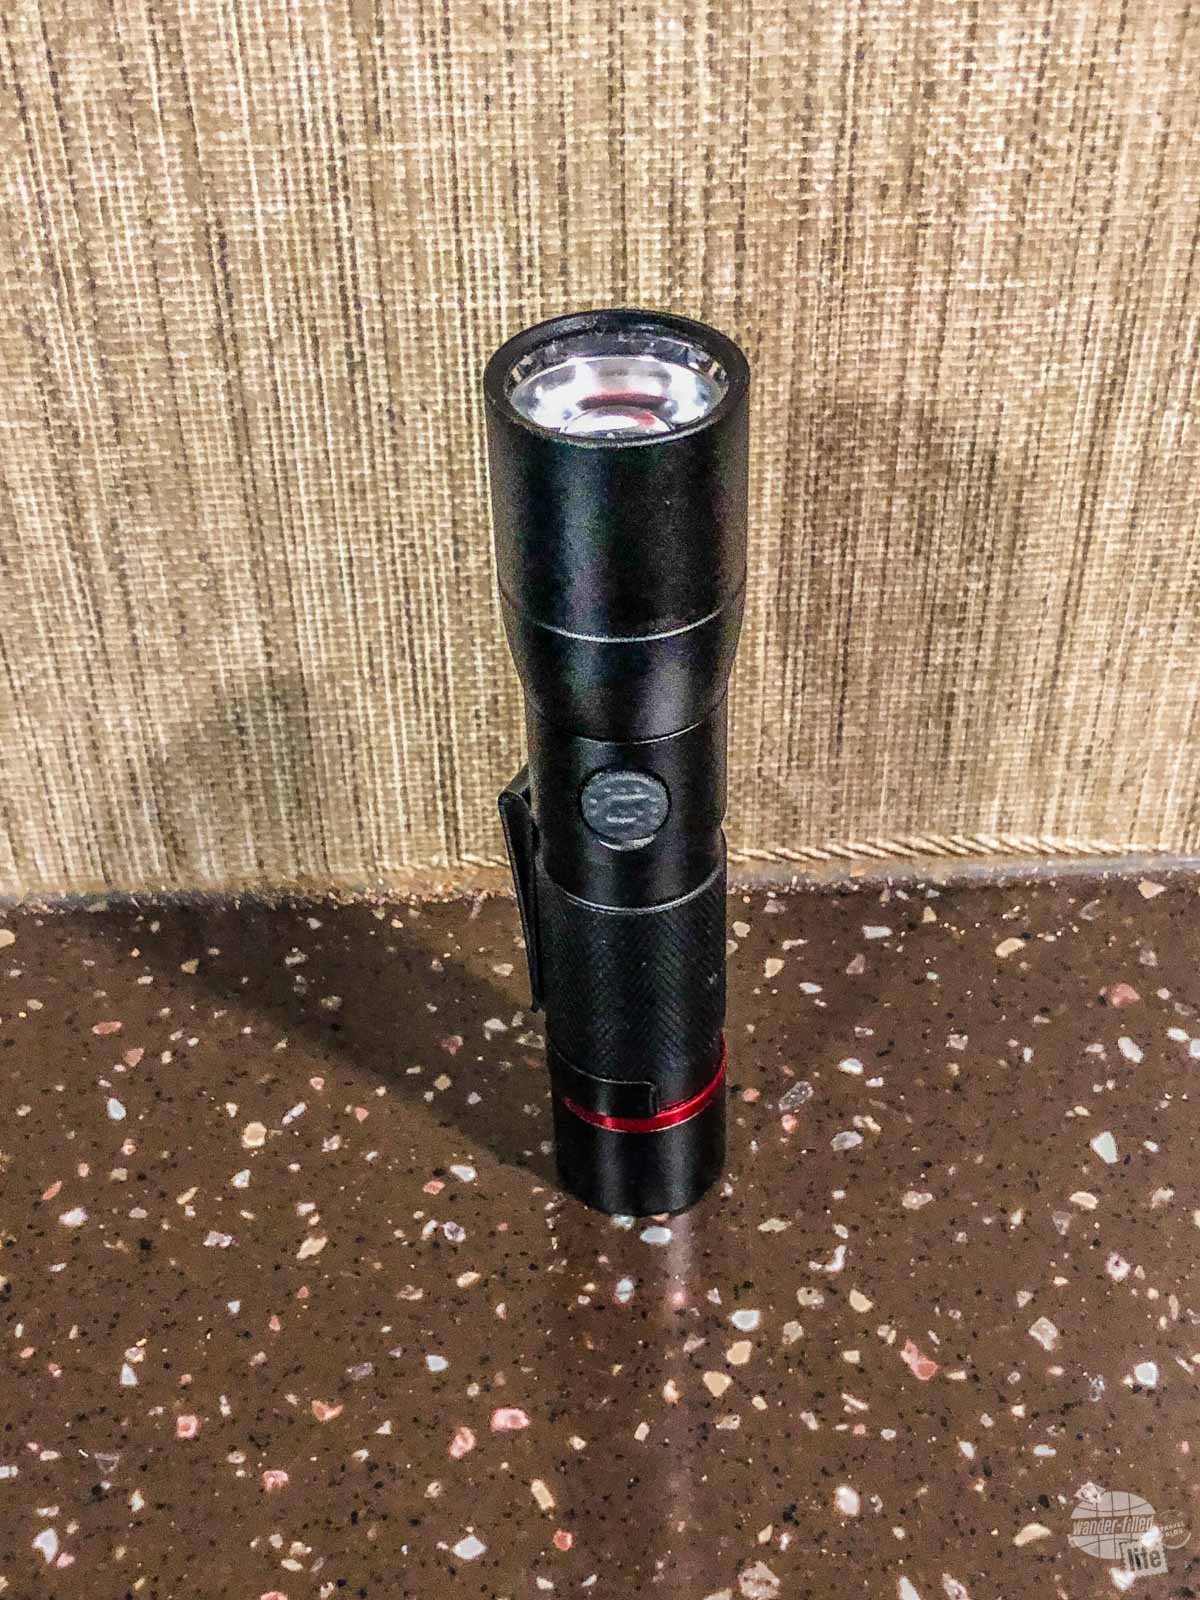 A USB-rechargeable flashlight we got from Cairn.